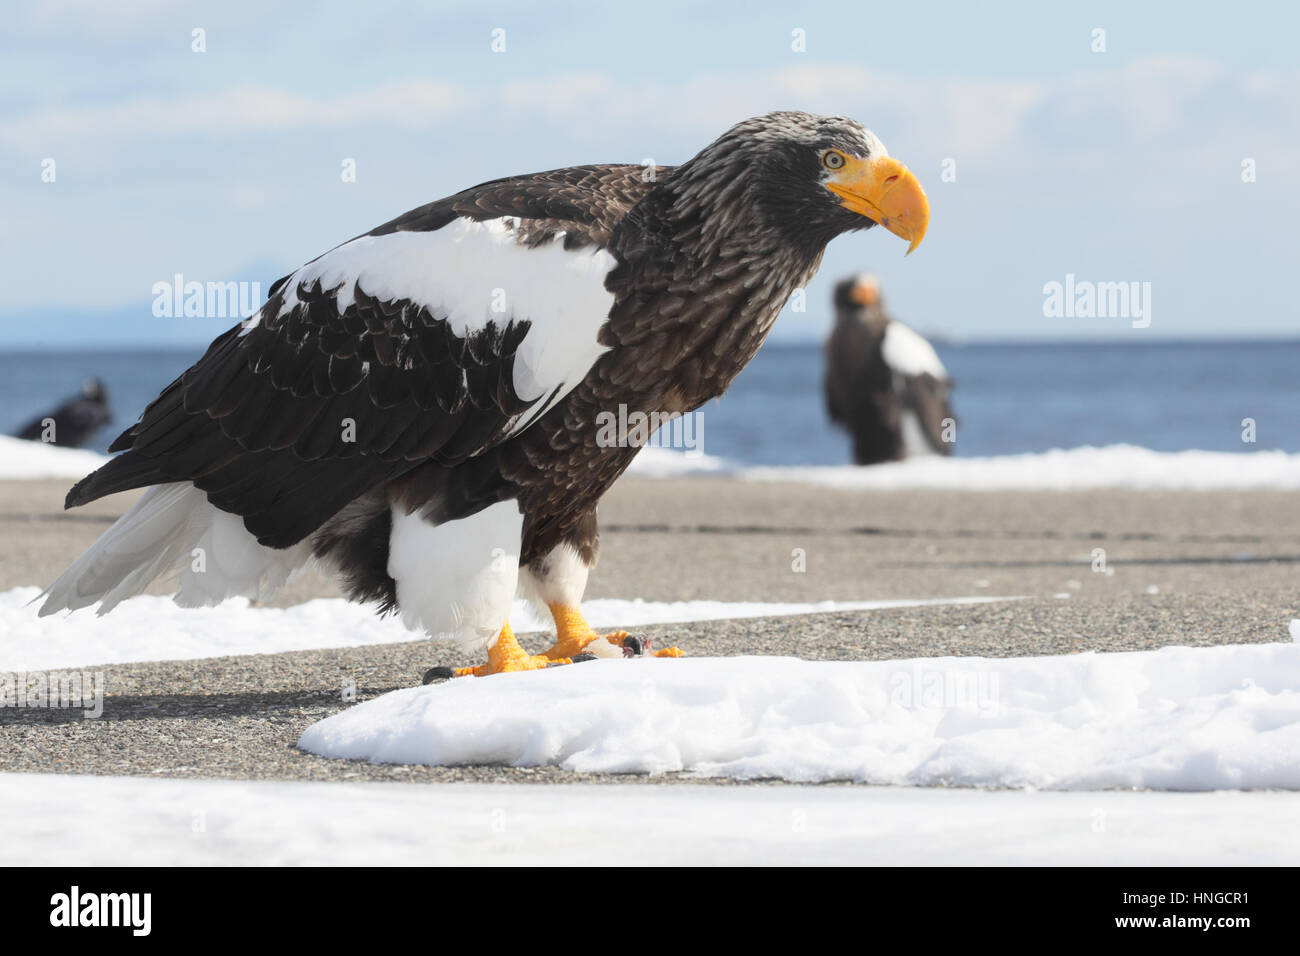 Wide angle of Steller's sea eagleS (Haliaeetus pelagicus) in Hokkaido, Japan. World's largest eagle, perched on harbour wall, scenery in background Stock Photo